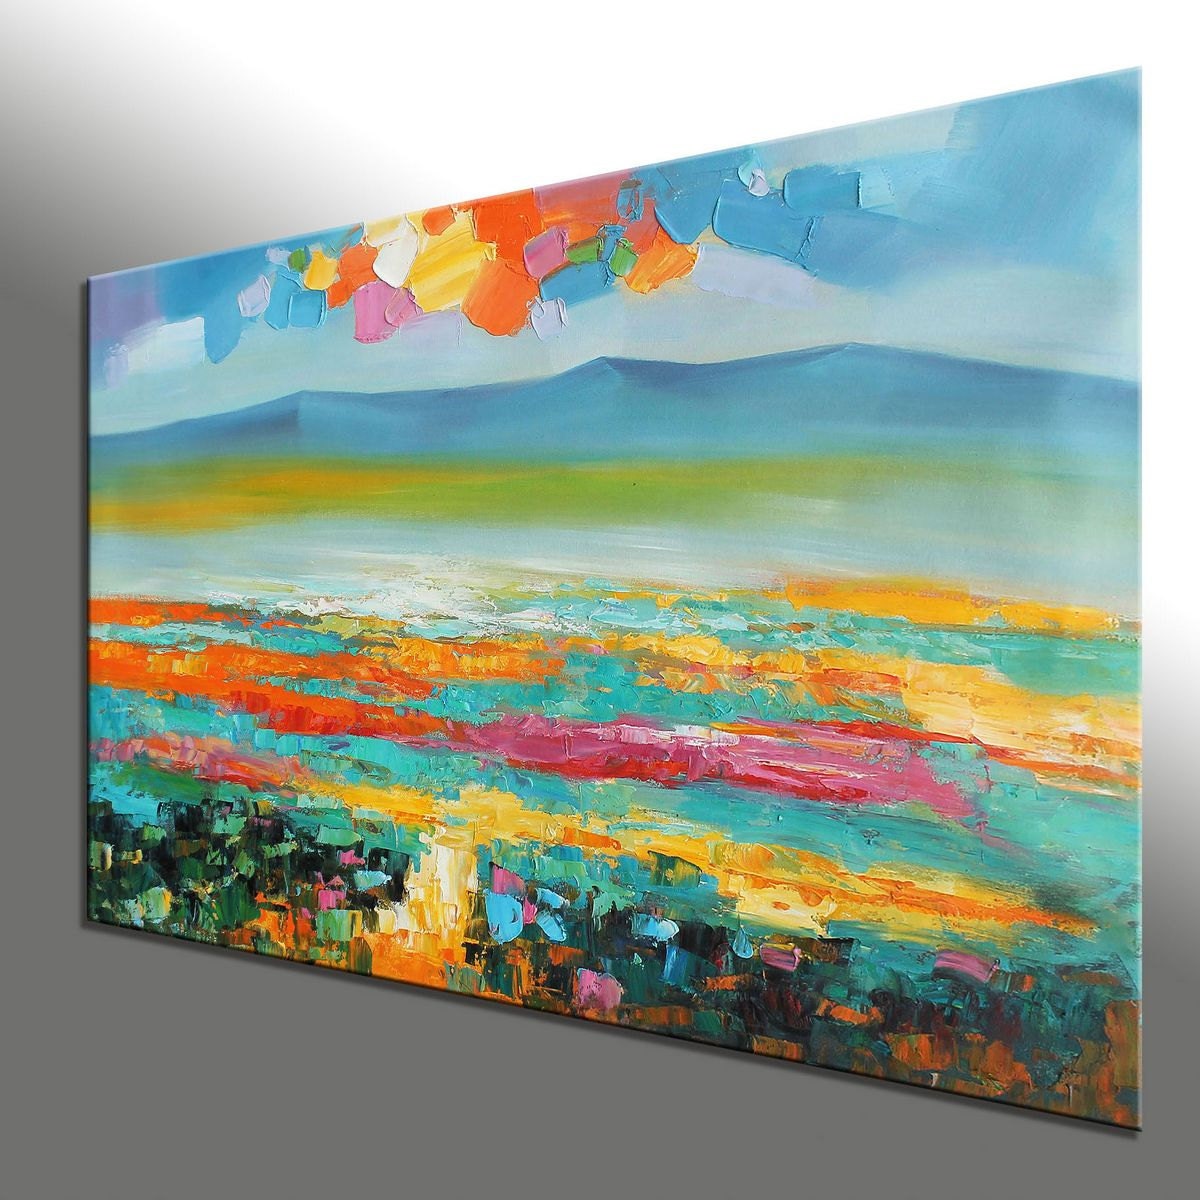 Abstract Oil Painting, Canvas Art, Original Abstract Painting, Modern Painting, Large Art, Original Landscape Oil Paintings, Abstract Art